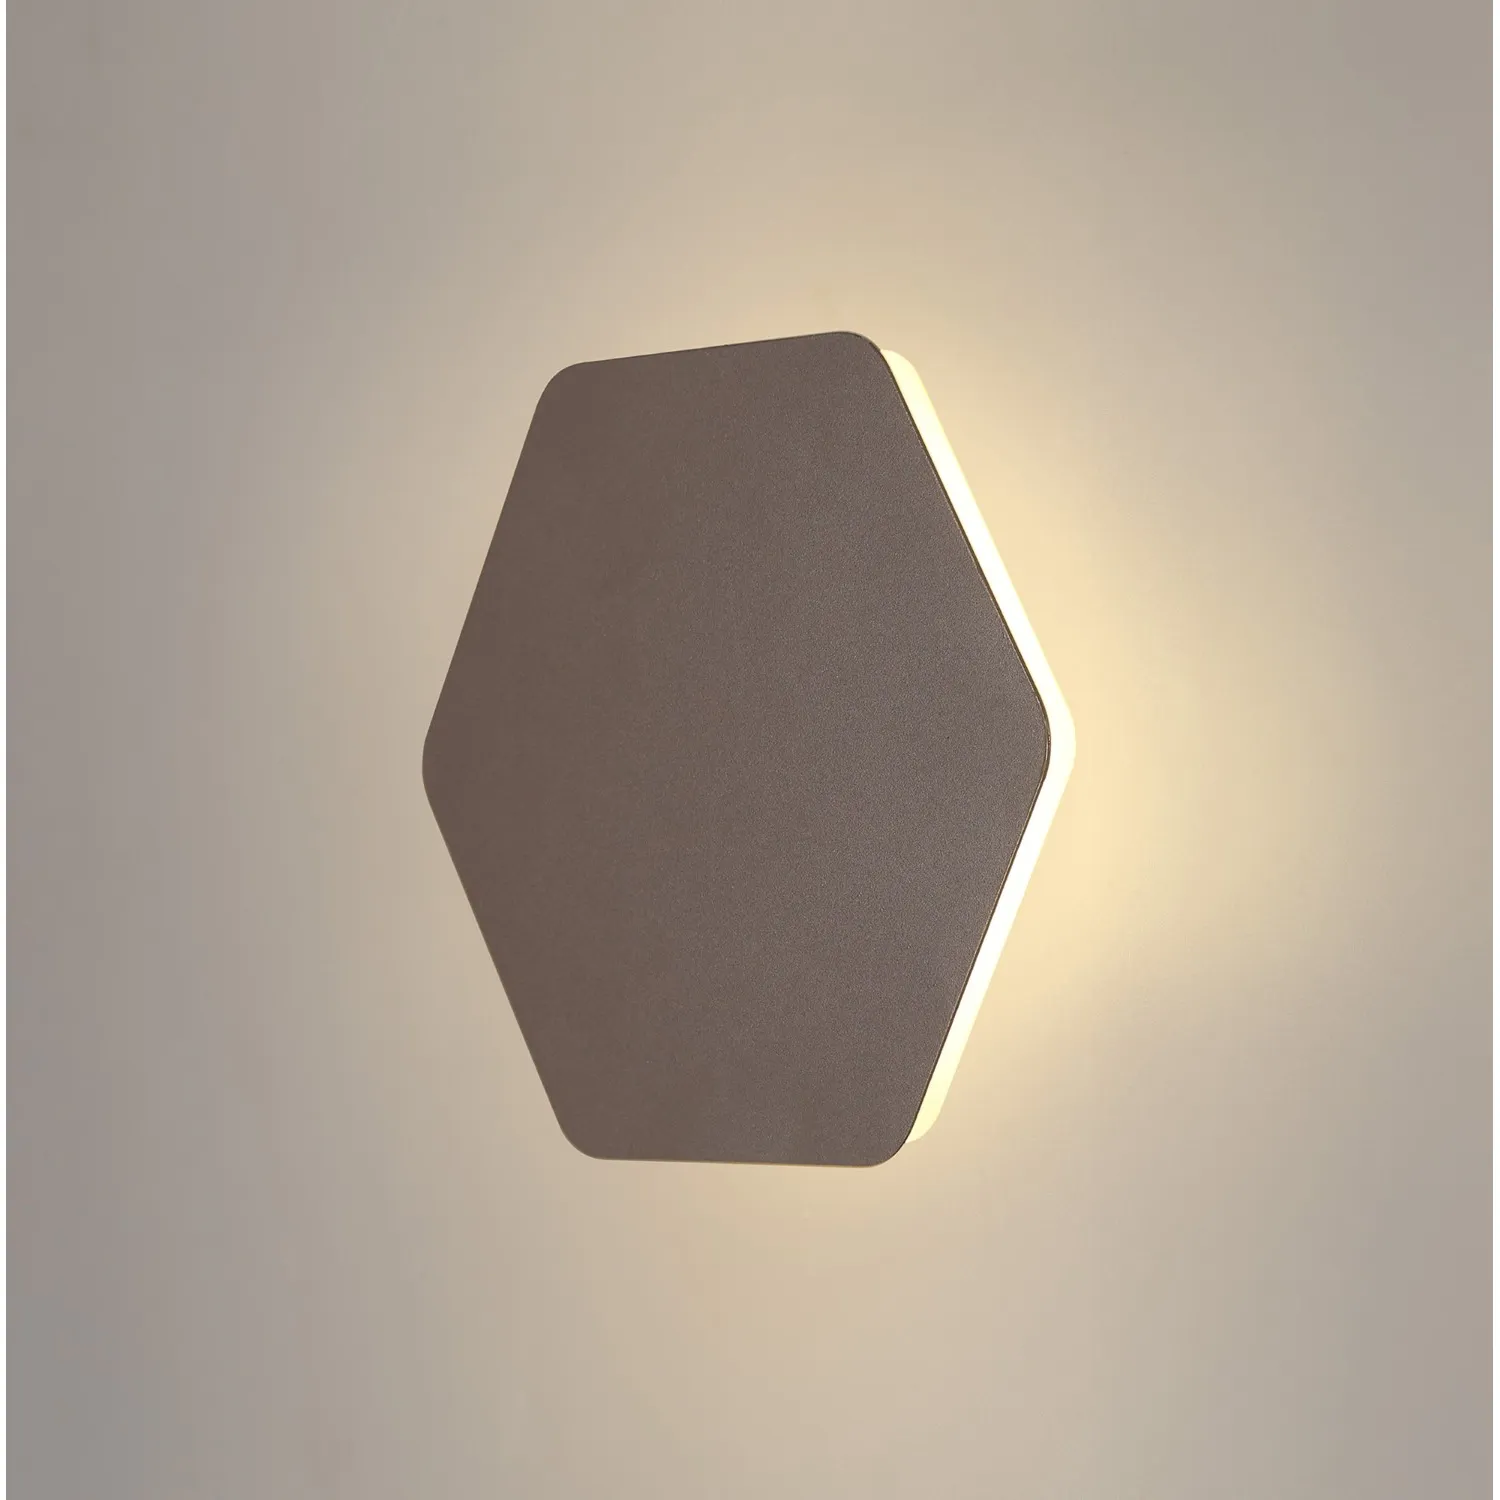 Edgware Magnetic Base Wall Lamp, 12W LED 3000K 498lm, 20 19cm Horizontal Hexagonal Centre, Coffee Acrylic Frosted Diffuser